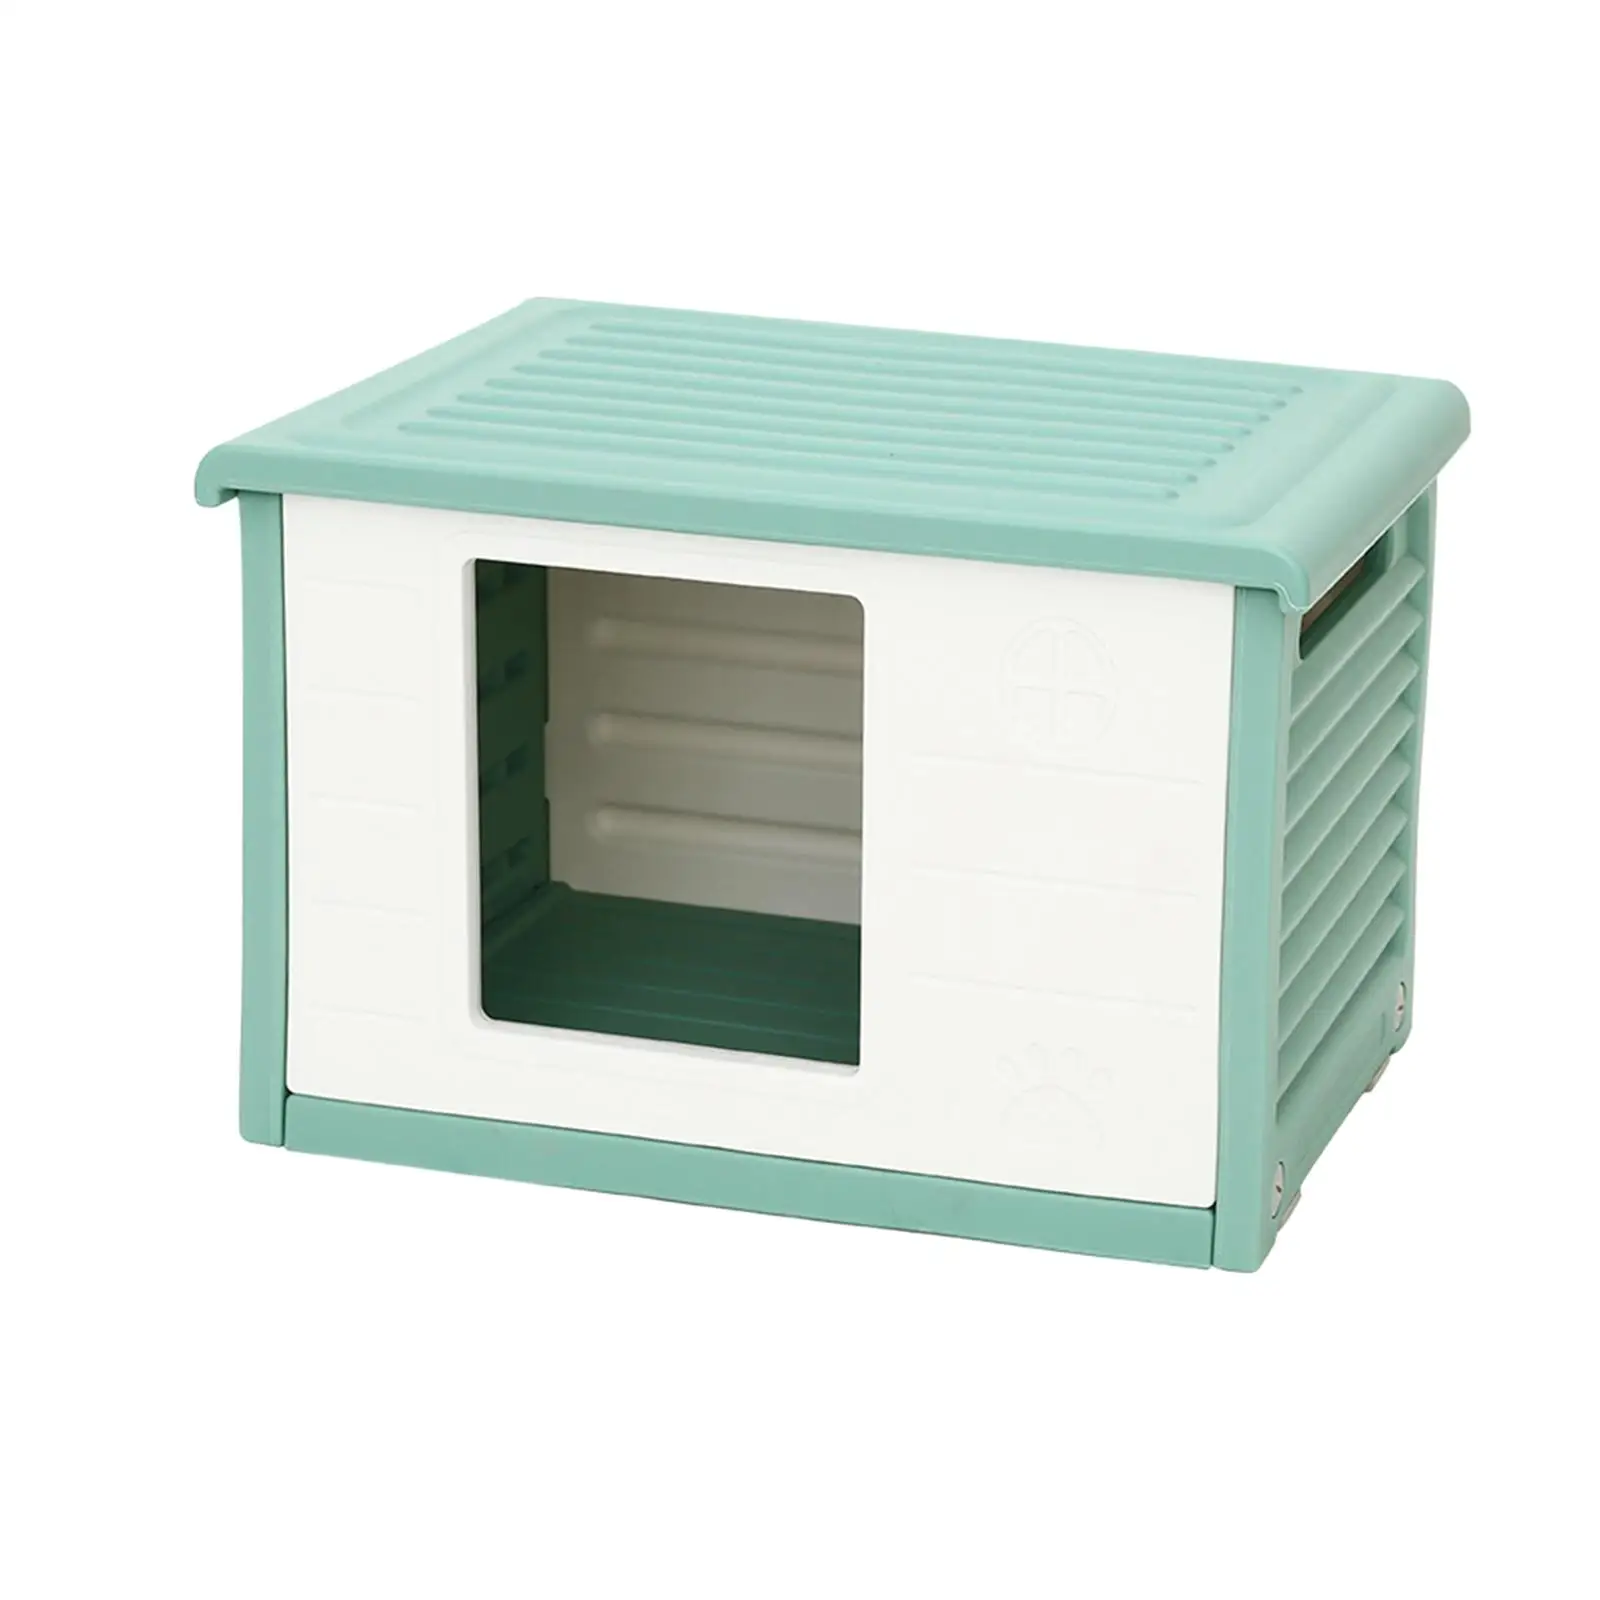 Stray Cats Shelter Winter Resistant Waterproof Bed Hutch Feral Kitty House for Small Dogs Outdoor Indoor Feral Cats Puppy Kitten